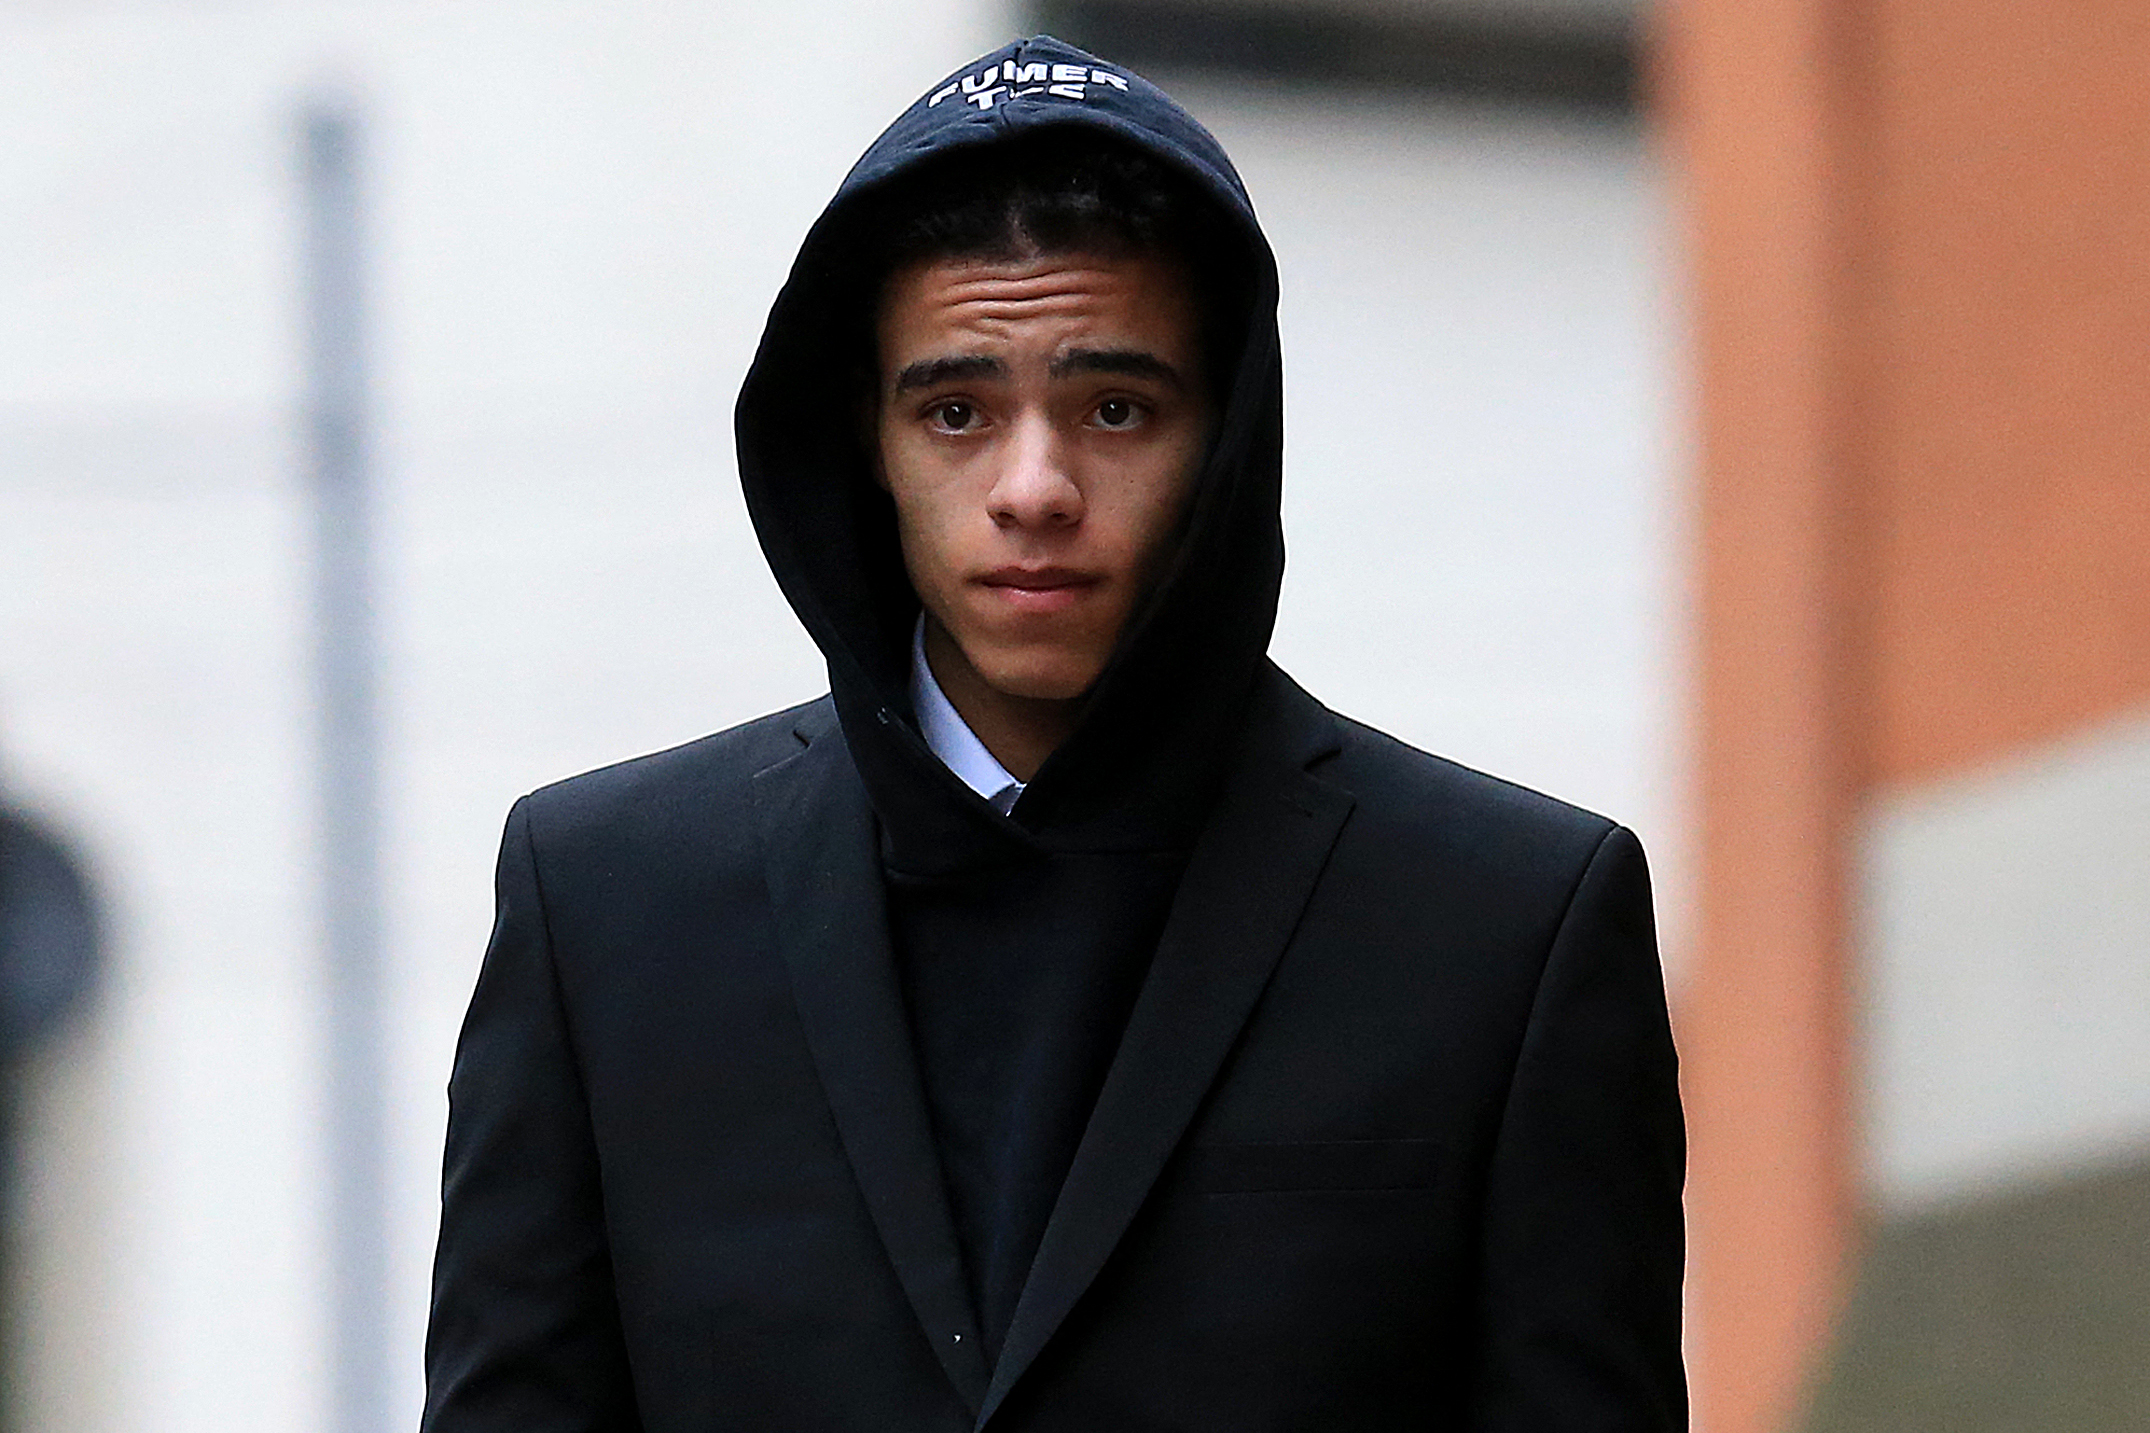 England and Manchester United footballer Mason Greenwood leaves Minshull Street Crown Court in Manchester on November 21, 2022 after a preliminary hearing on charges of attempted rape, controlling and coercive behaviour, and assault. - The 21-year-old was first arrested in January over allegations relating to a young woman after images and videos were posted online. All three charges relate to the same complainant. (Photo by Lindsey Parnaby / AFP) (Photo by LINDSEY PARNABY/AFP via Getty Images)